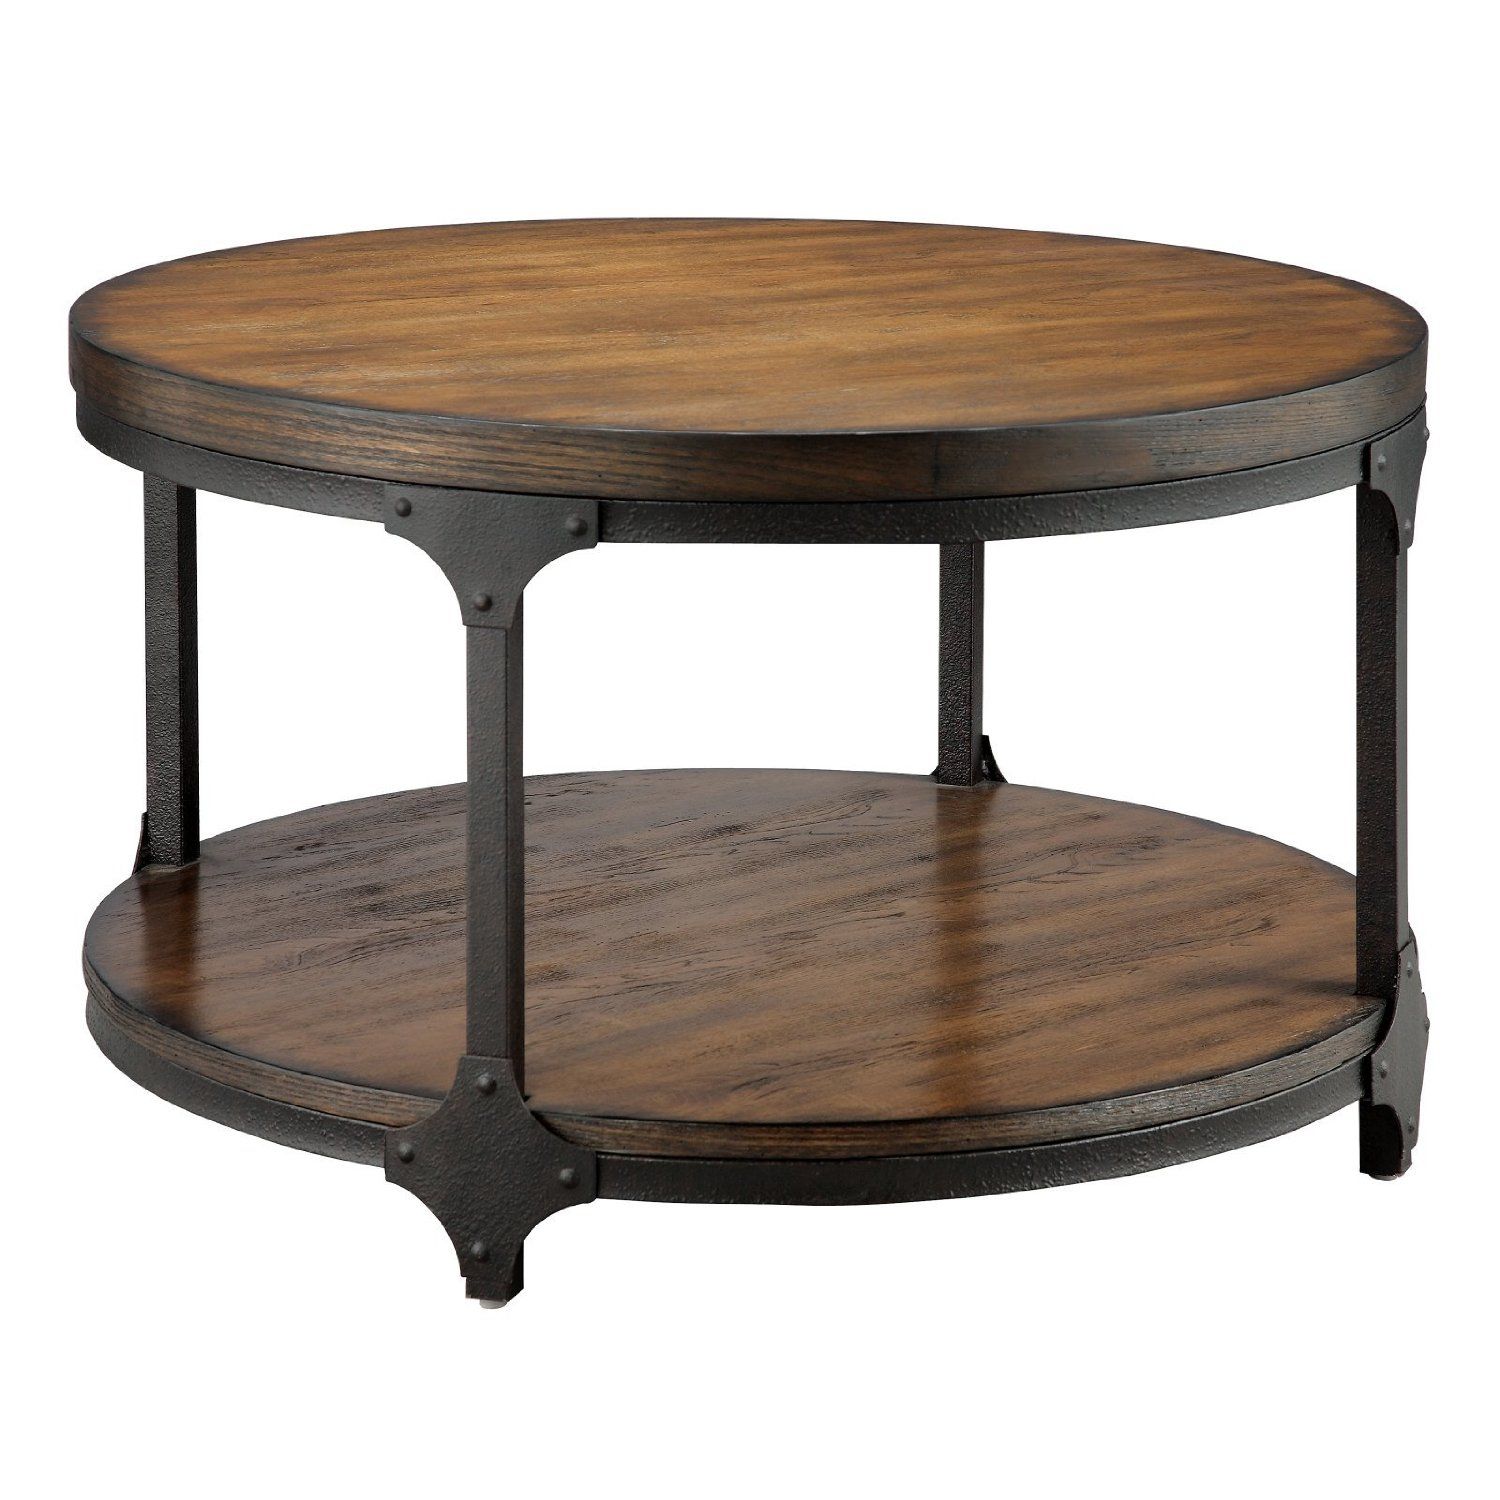 Brown Varnished Wooden Coffee Table With Rustic Round Rustic Coffee Tables Furniture Living Room Round Wooden Coffee Table With Ladder Shelf And Black Metal Frame Round Metal And W (View 1 of 10)